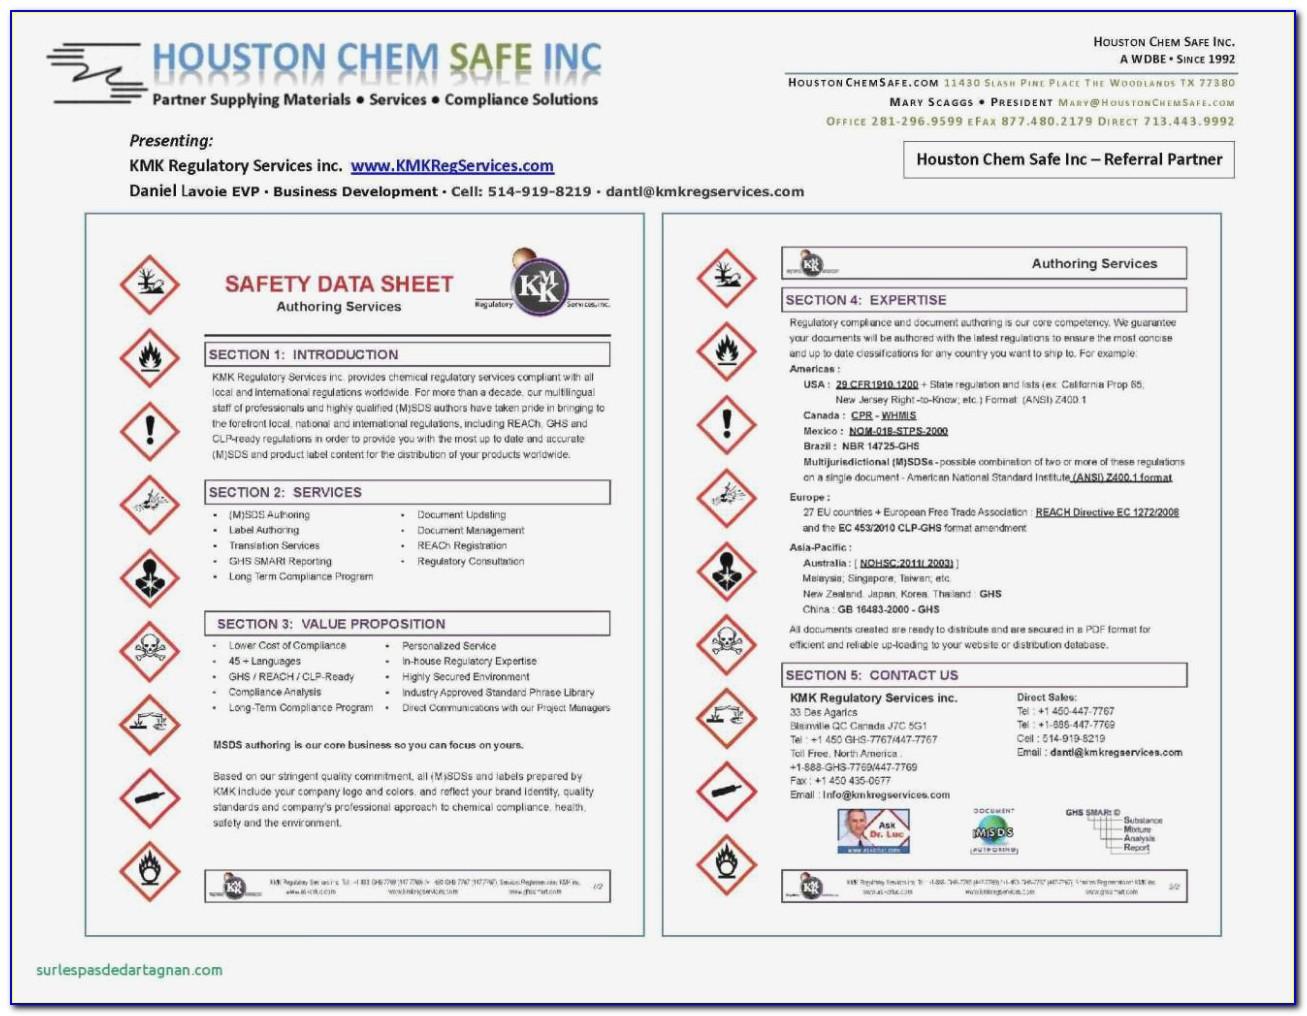 Free Msds Label Template